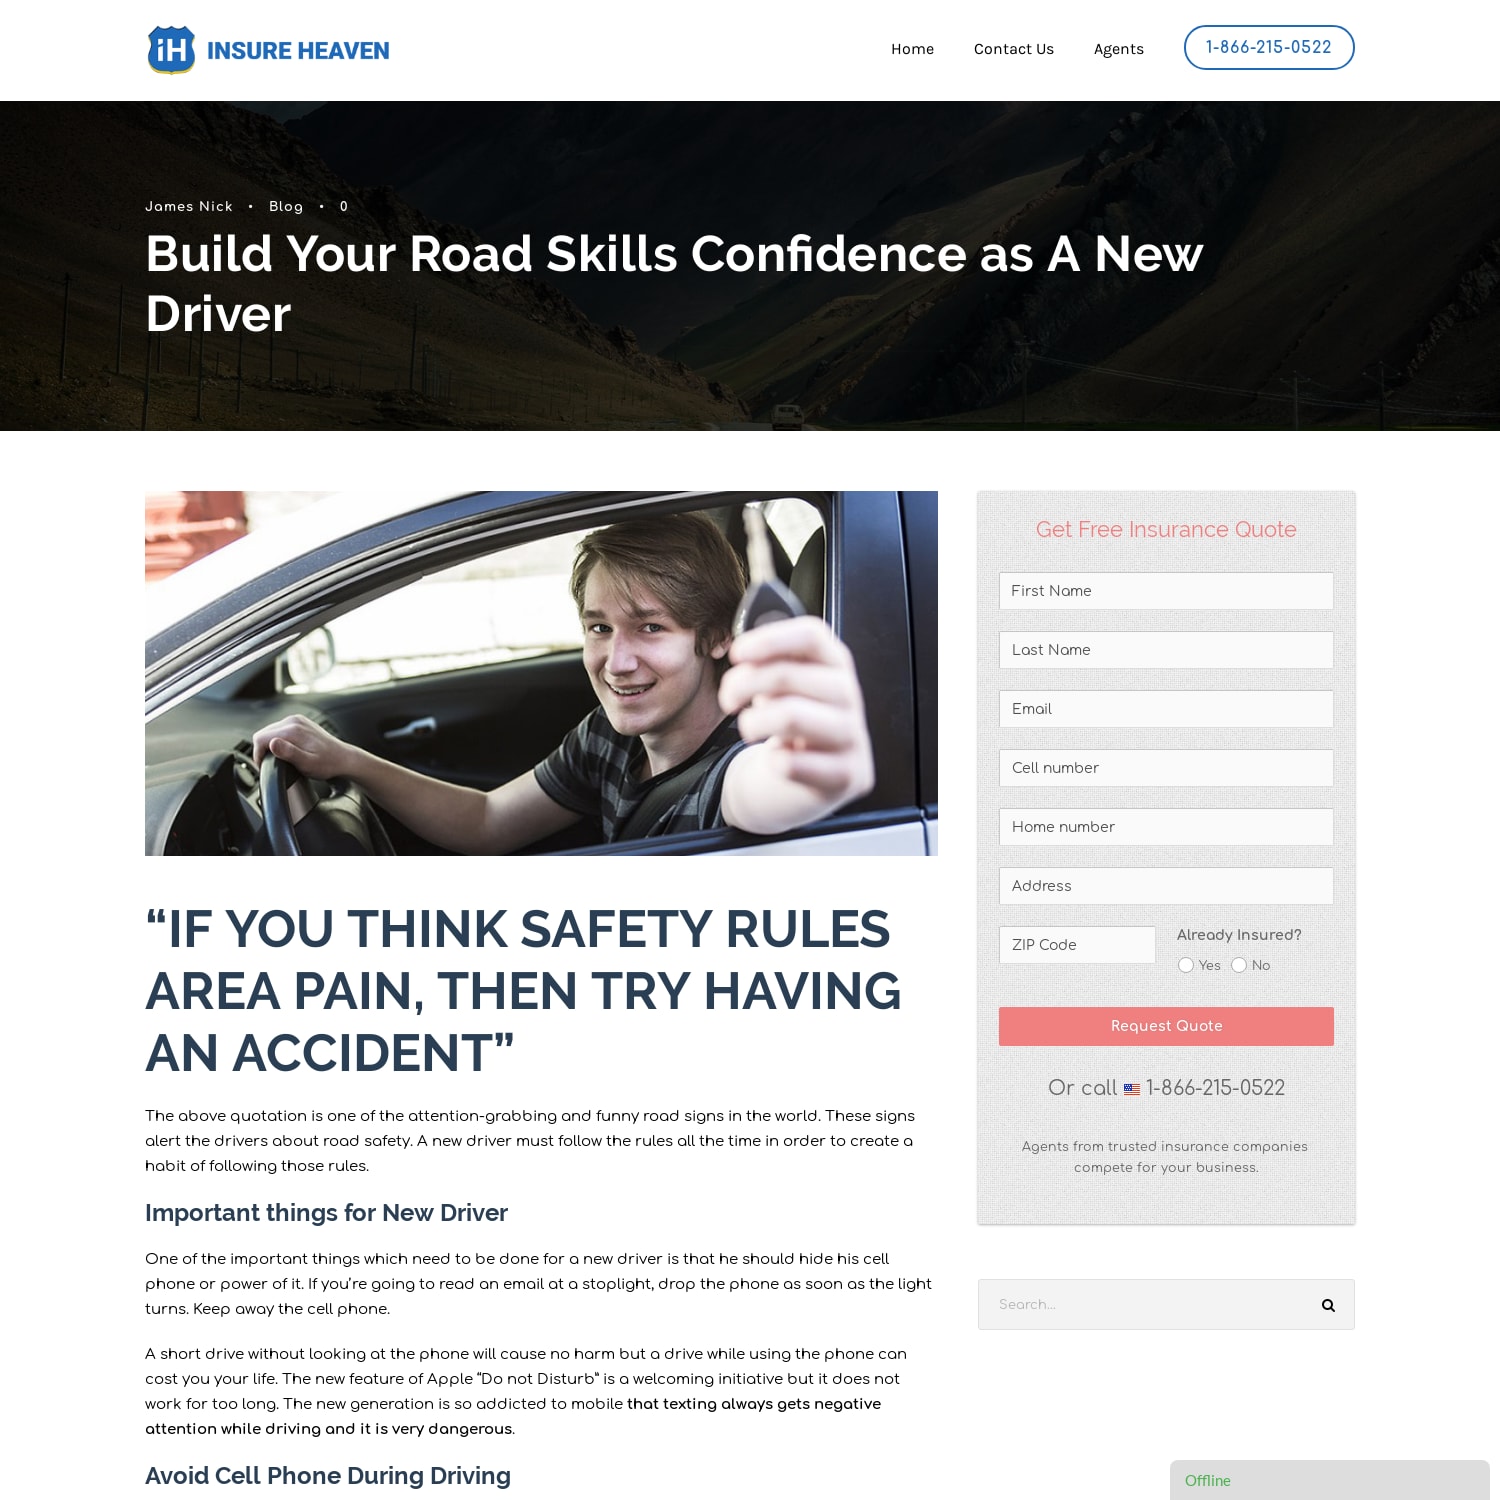 Build Your Road Skills Confidence as A New Driver